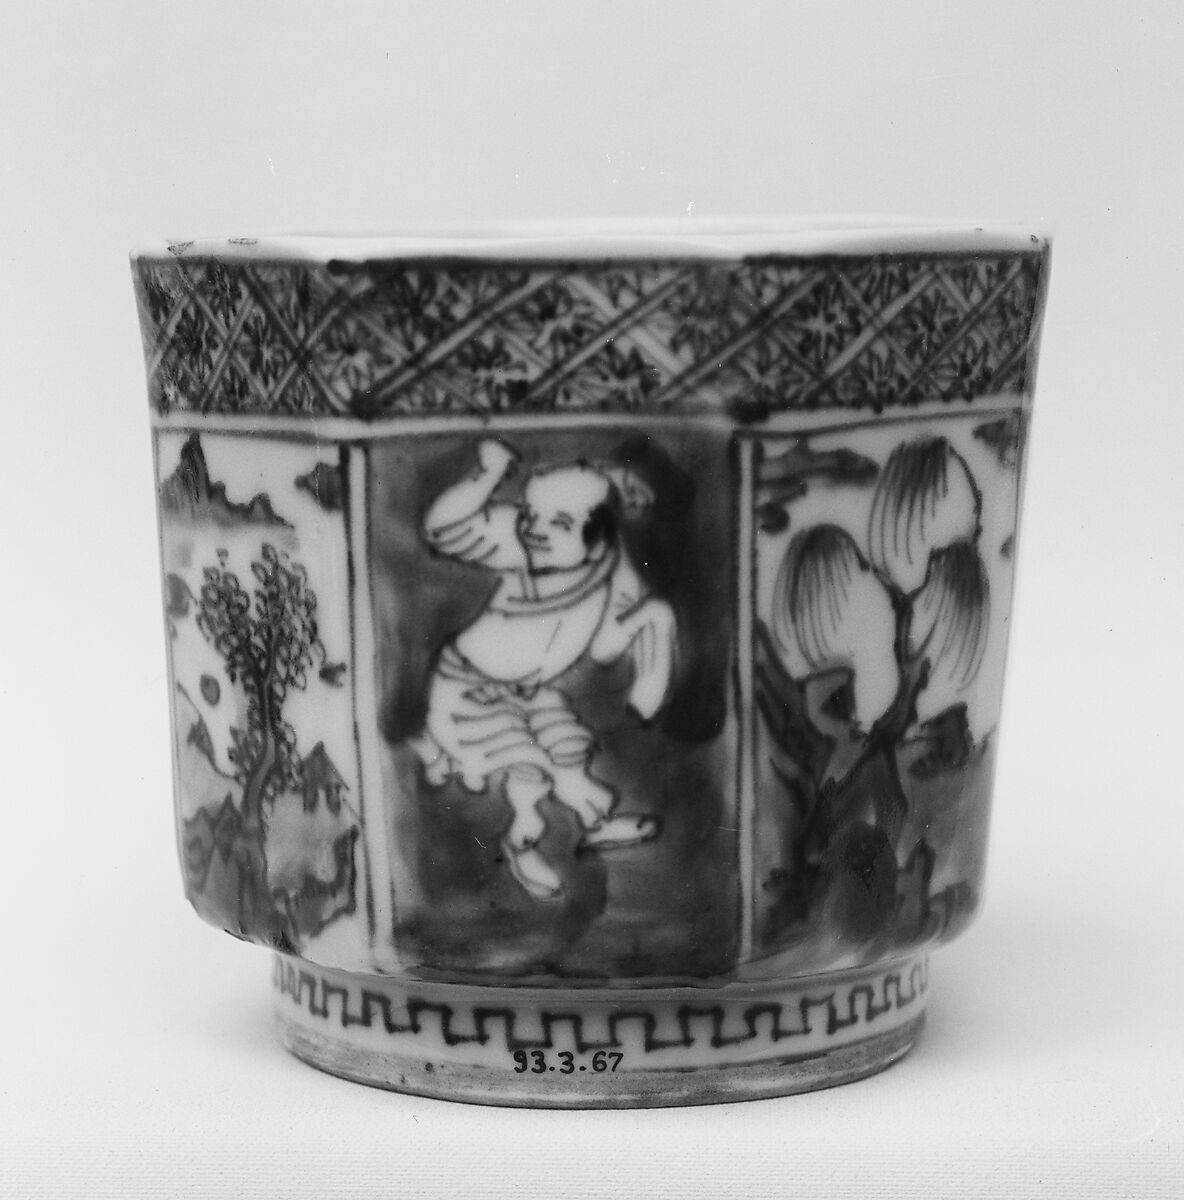 Hexagonal Cup with Chinese Figures and Landscapes, Porcelain with underglaze blue (Hizen ware; Imari type), Japan 